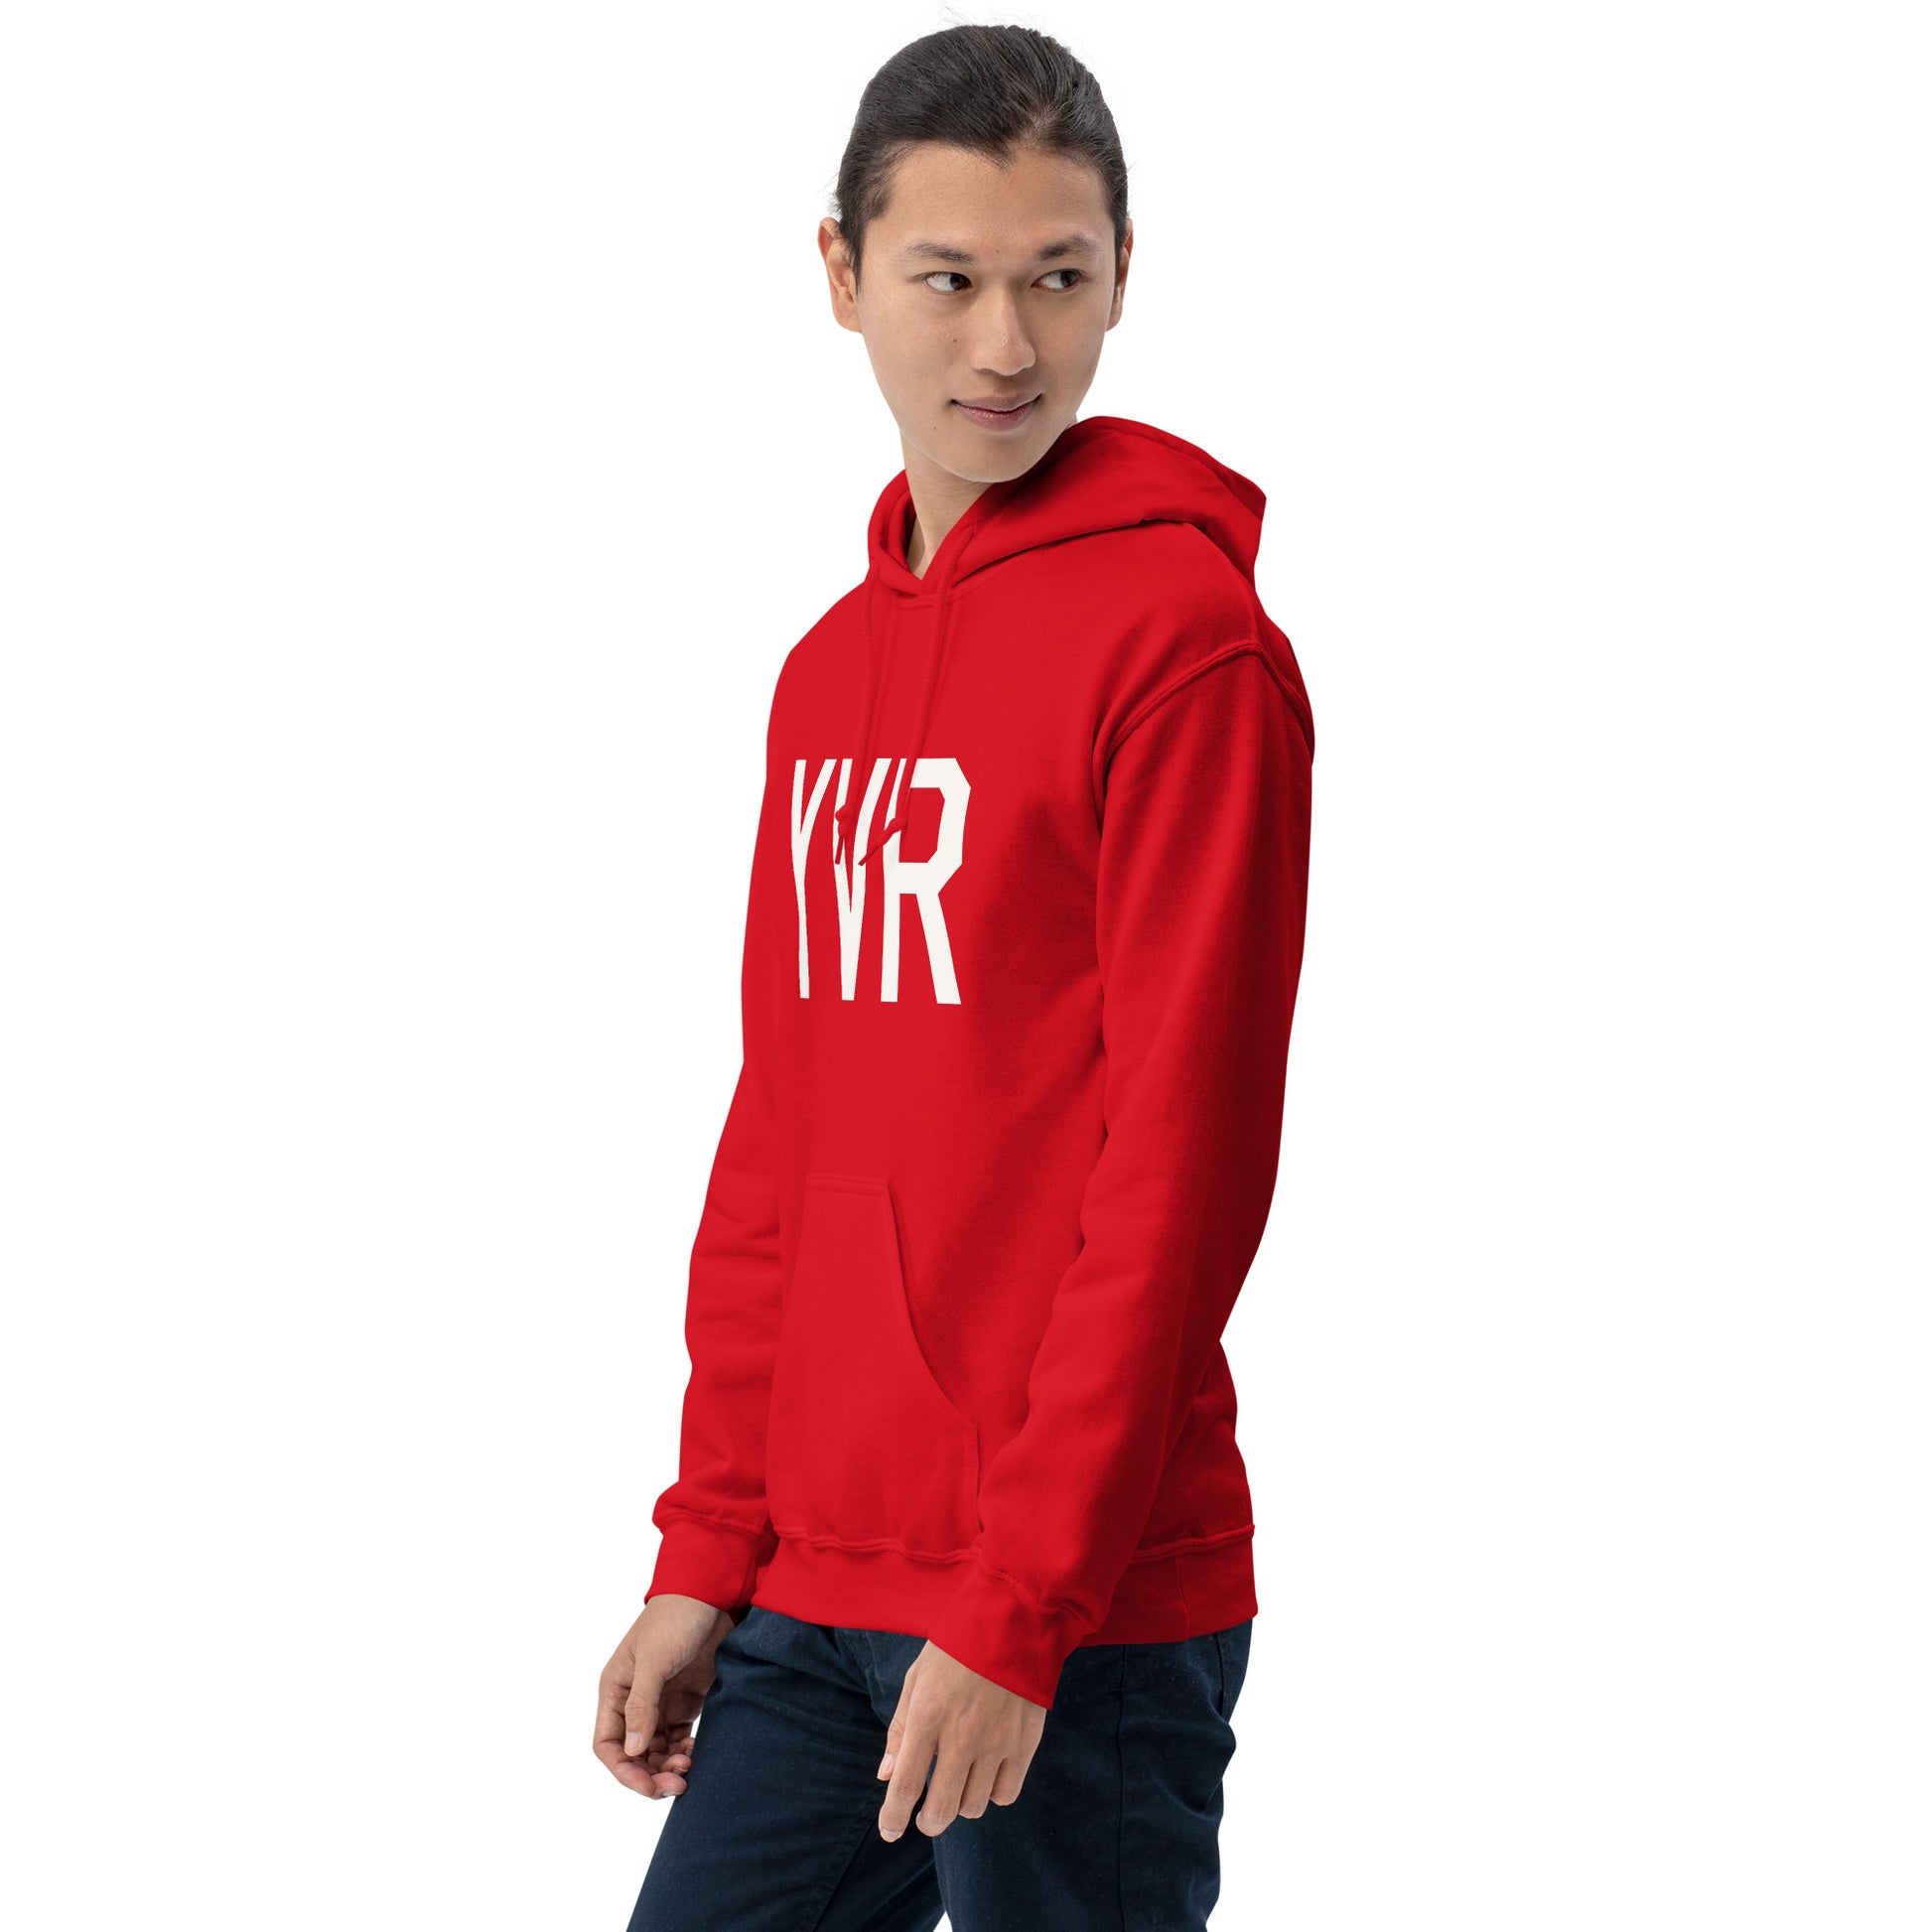 Unisex Hoodie - White Graphic • YVR Vancouver • YHM Designs - Image 12